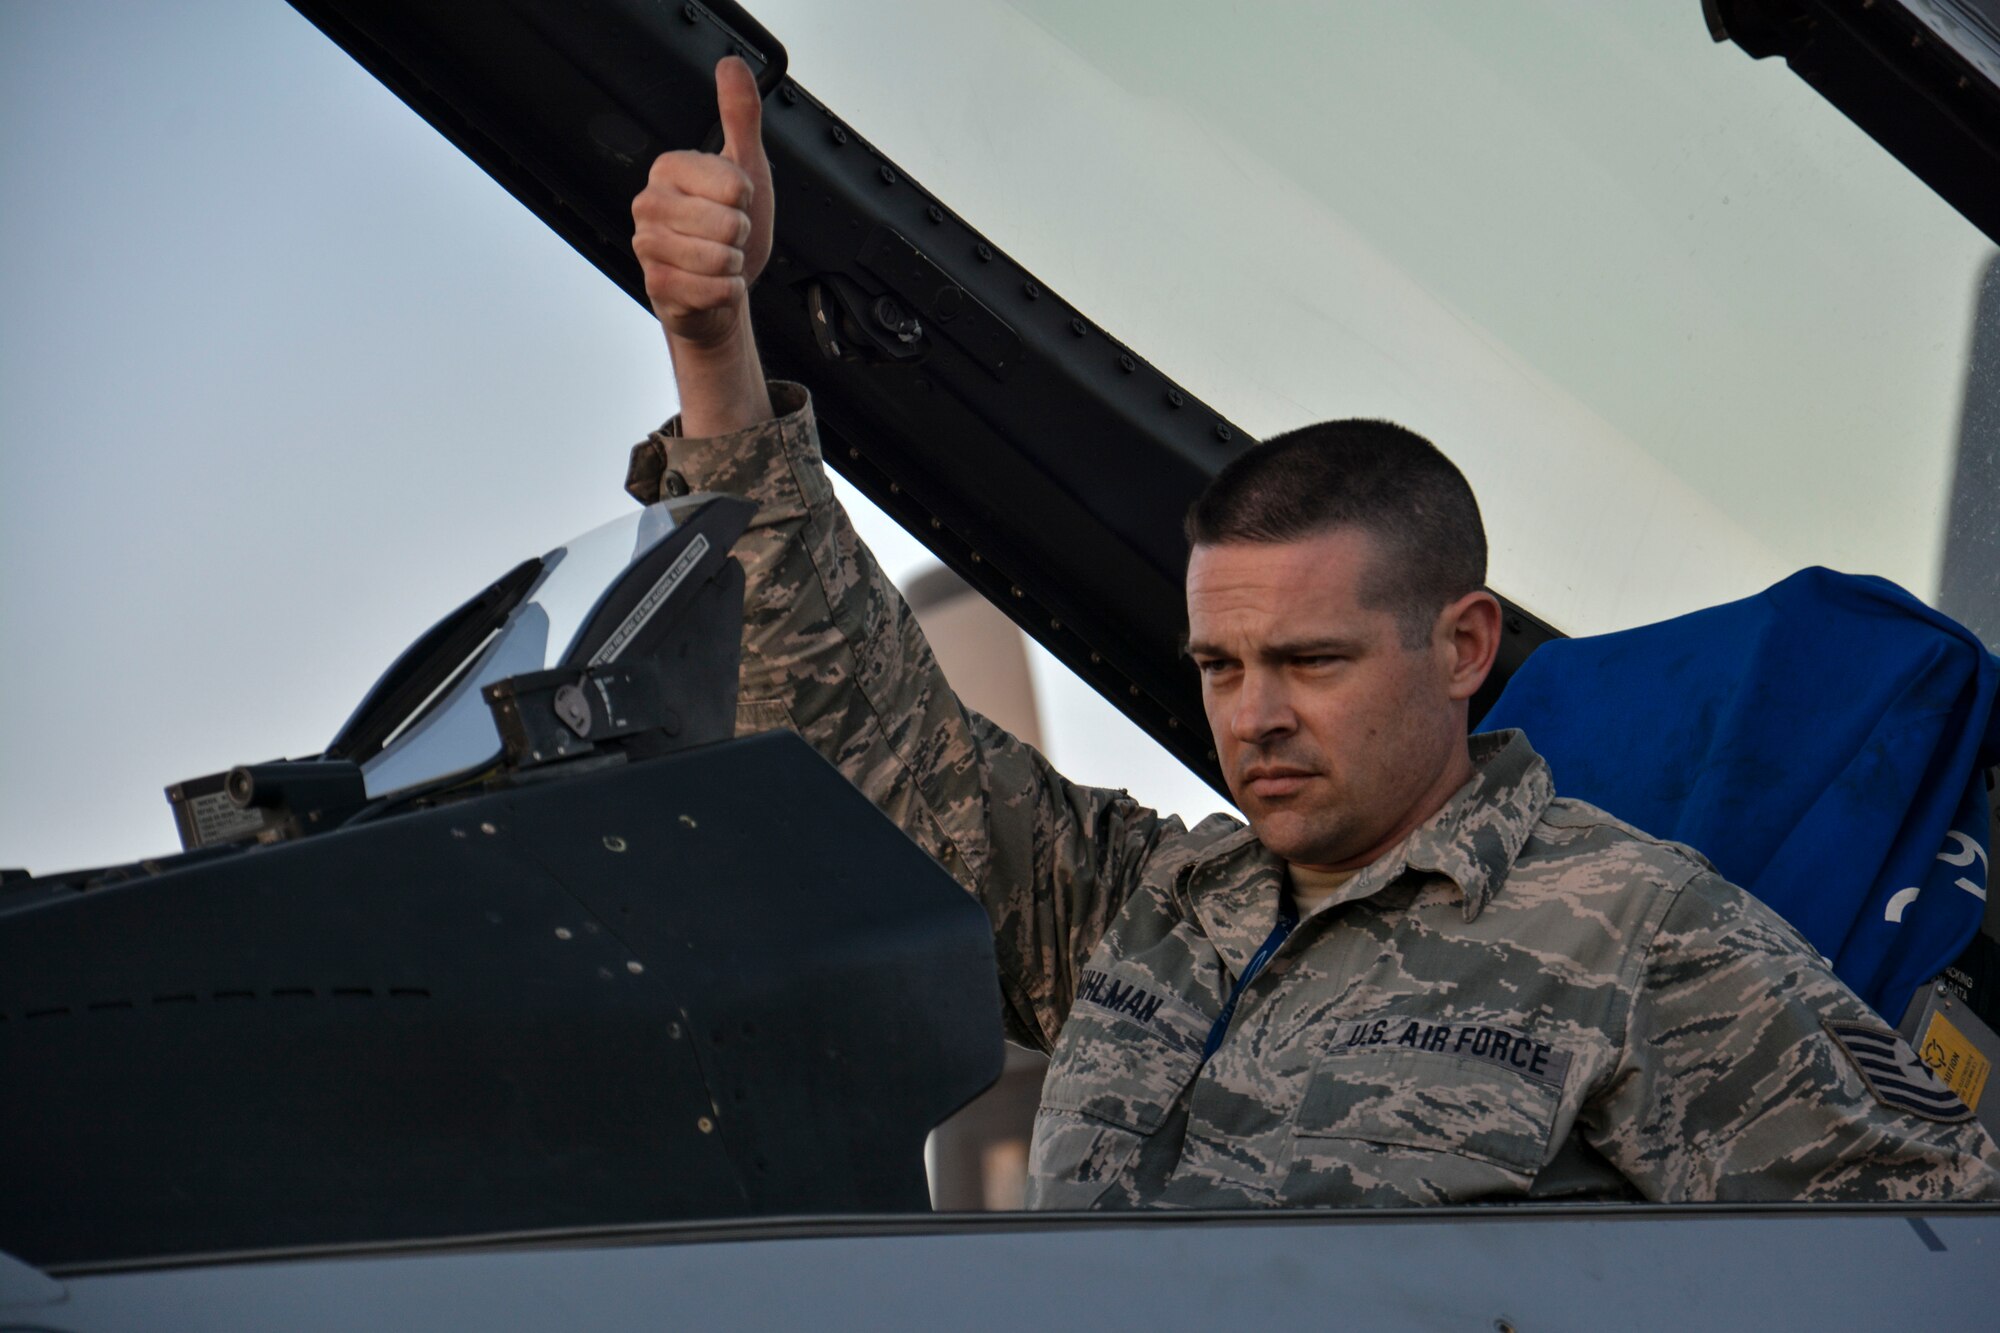 Tech. Sgt. Kyle Kuhlman, assigned to the 149th Fighter Wing with the Texas Air National Guard, gives a thumbs-up before other airmen begin to tow an F-16 Fighting Falcon at the FIDAE airshow in Santiago, Chile, March 24.  Nearly 60 U.S. airmen are participating in subject matter expert exchanges with Chilean air force counterparts during the week of FIDAE, and as part of the events will host static displays of the C-130 Hercules and F-16 Fighting Falcon during the FIDAE Air Show in Santiago, March 25 through 30. The exchanges, conducted regularly throughout the year, involve U.S. Airmen sharing best practices and procedures to build partnerships and promote interoperability with partner-nations throughout South America, Central America and the Caribbean. (U.S. Air Force photo by Capt. Justin Brockhoff/Released)